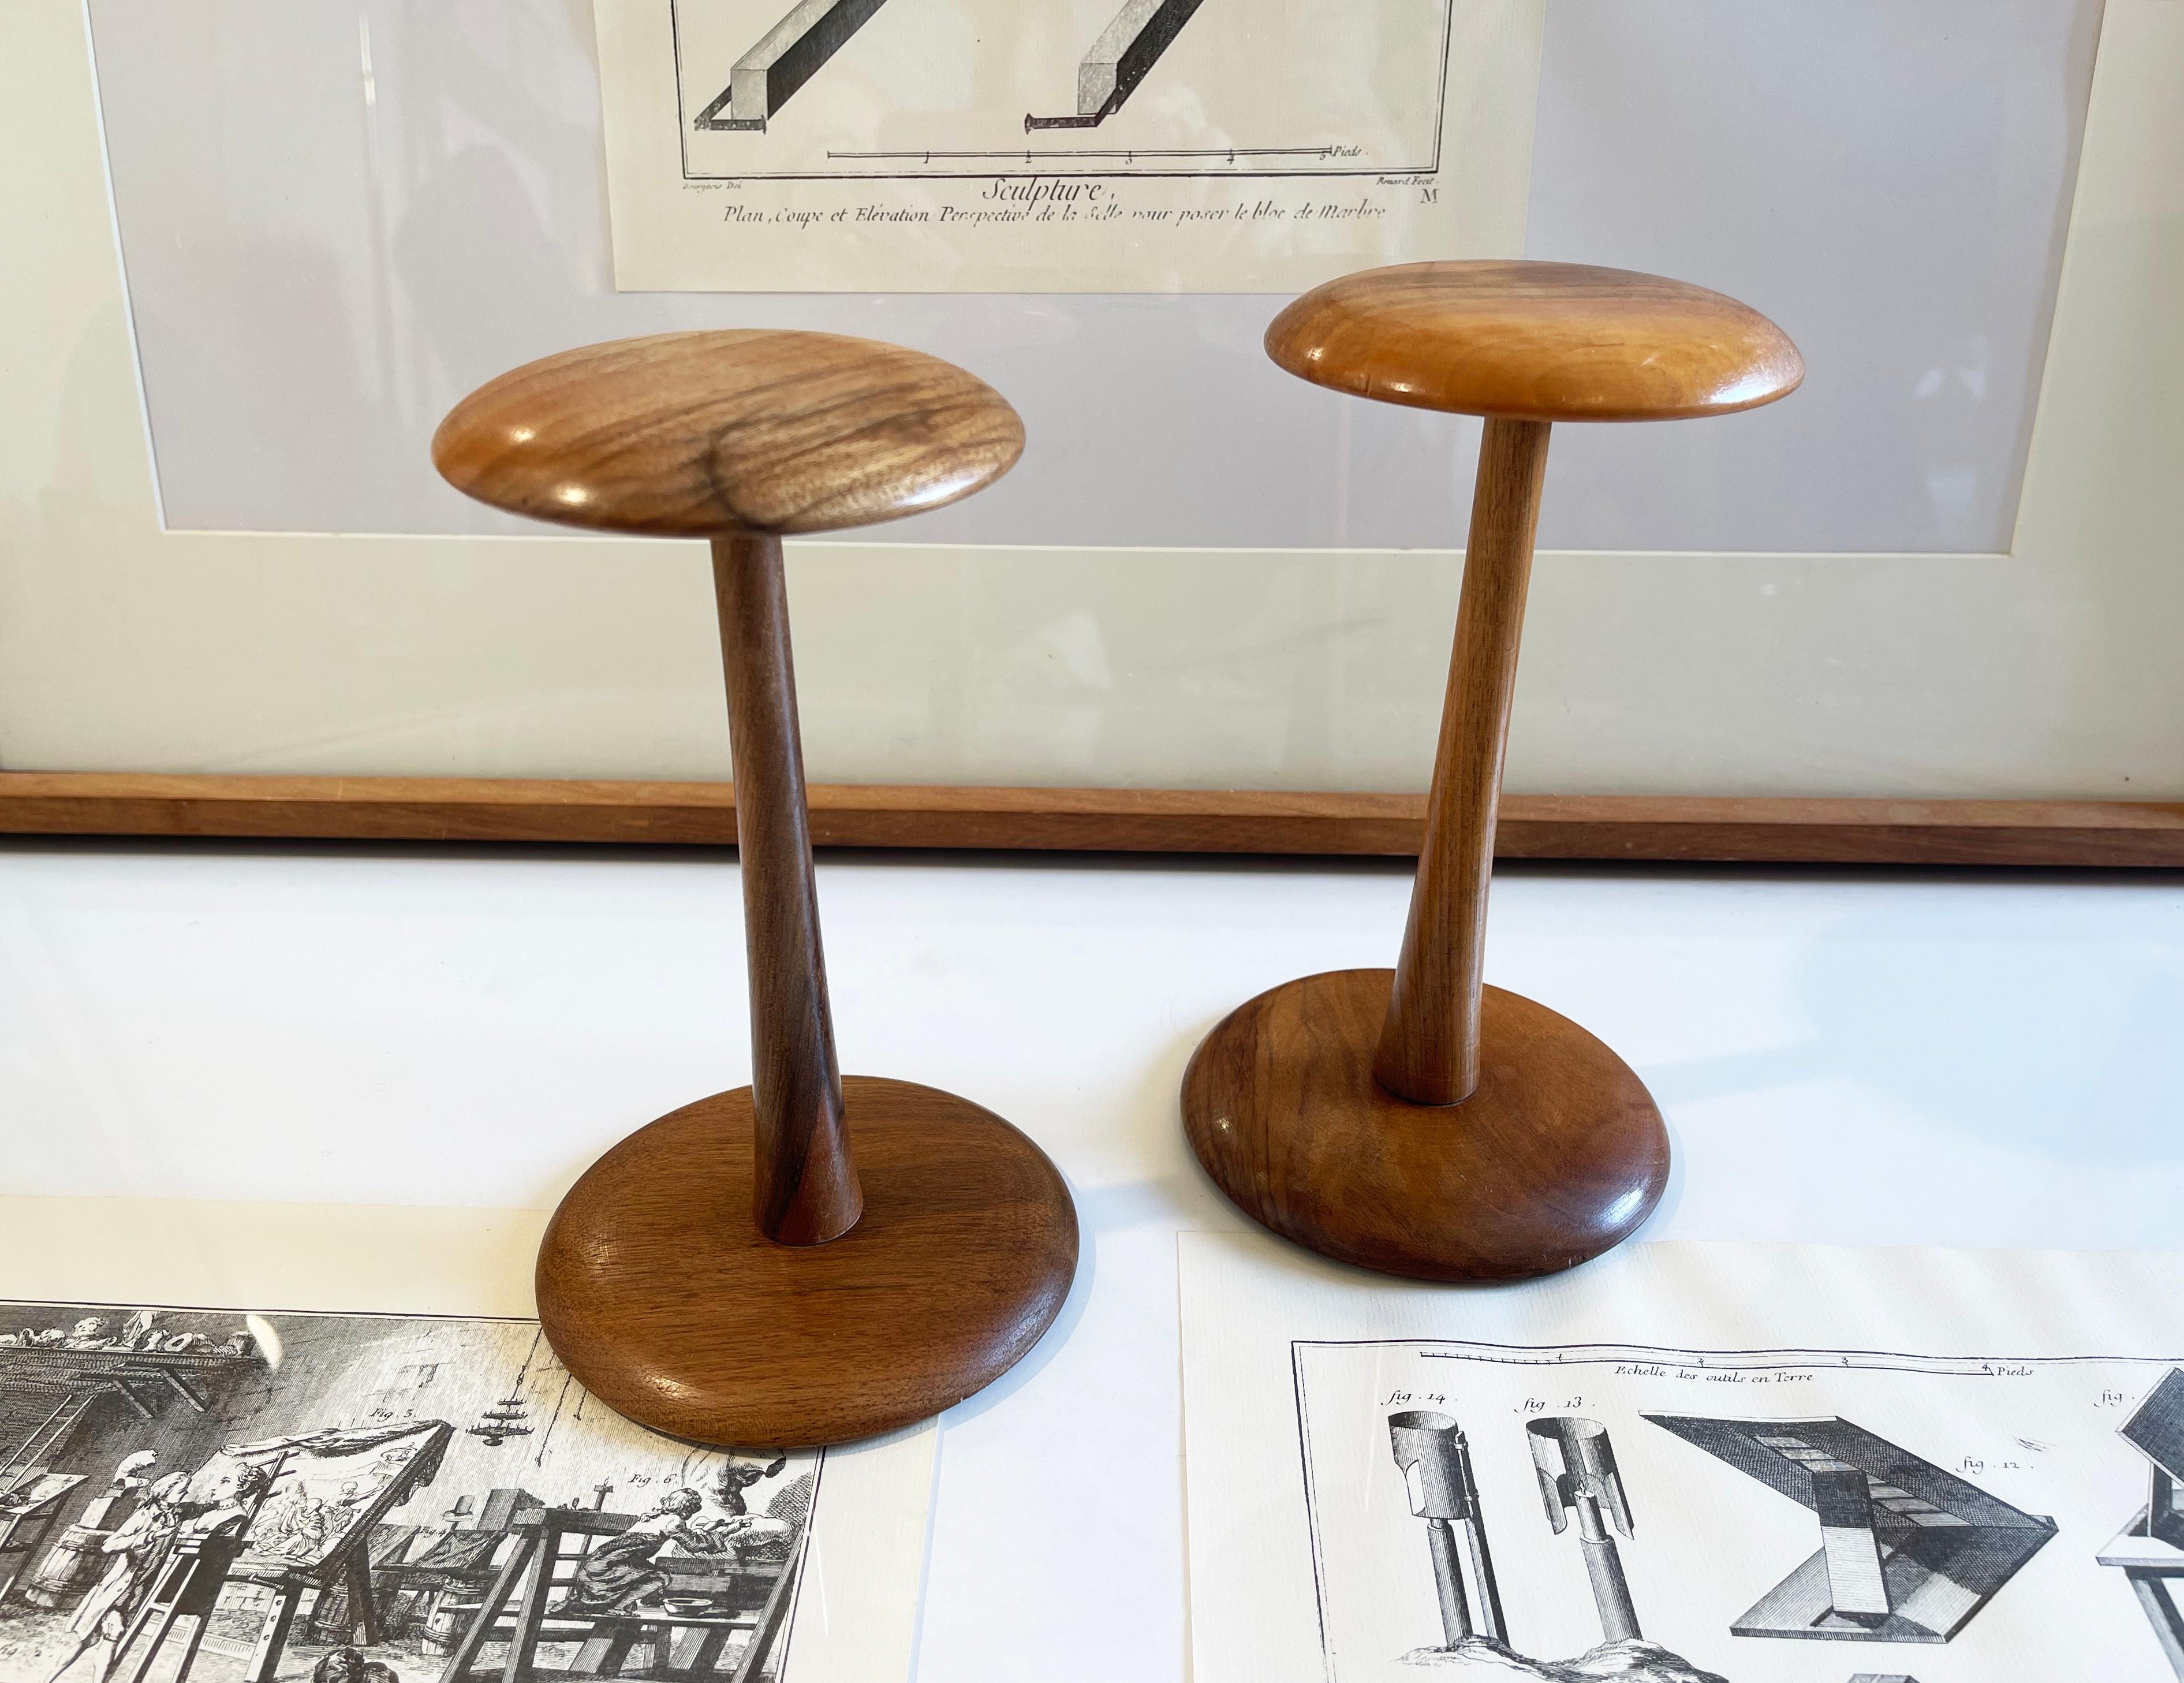 Early to mid 20th century German hat stand, served as shop & window display.
This is a charming pair of antique hat stands, ideal for the collector or a retail shop space.

The two stands came from about 1930's German milliners’ shop in the Rhine